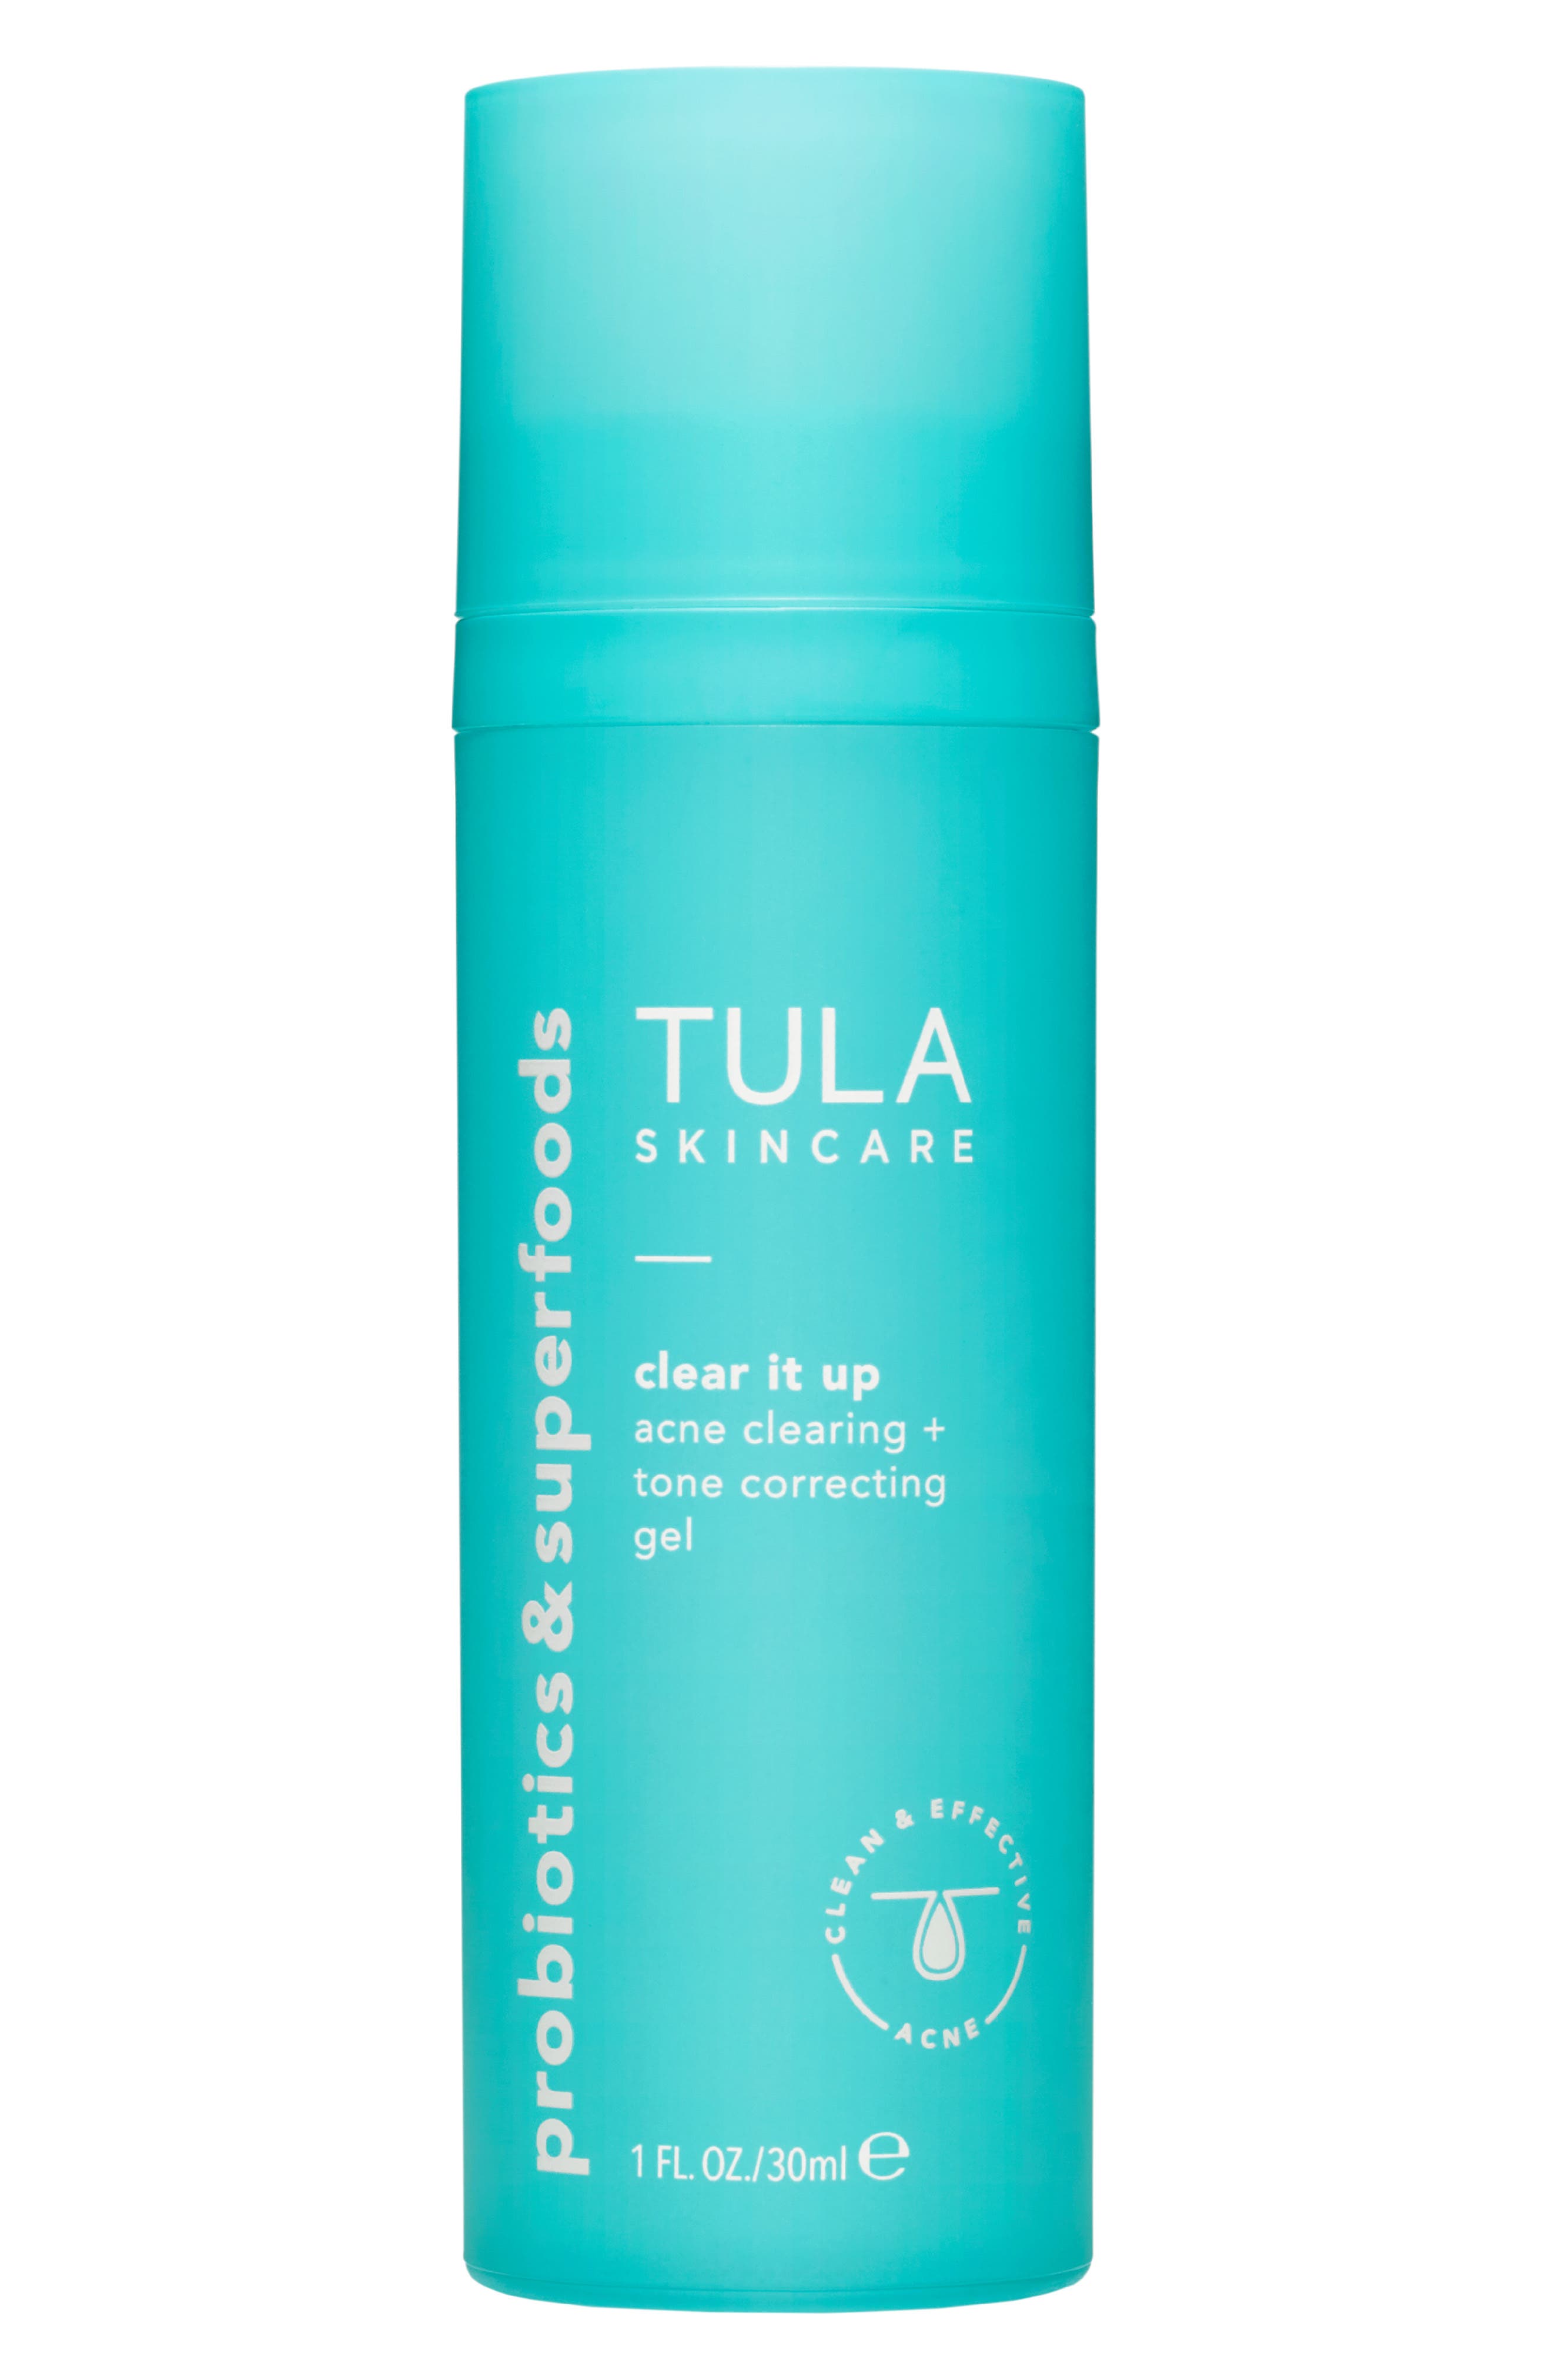 TULA SKINCARE Clear It Up Acne Clearing and Tone Correcting Gel